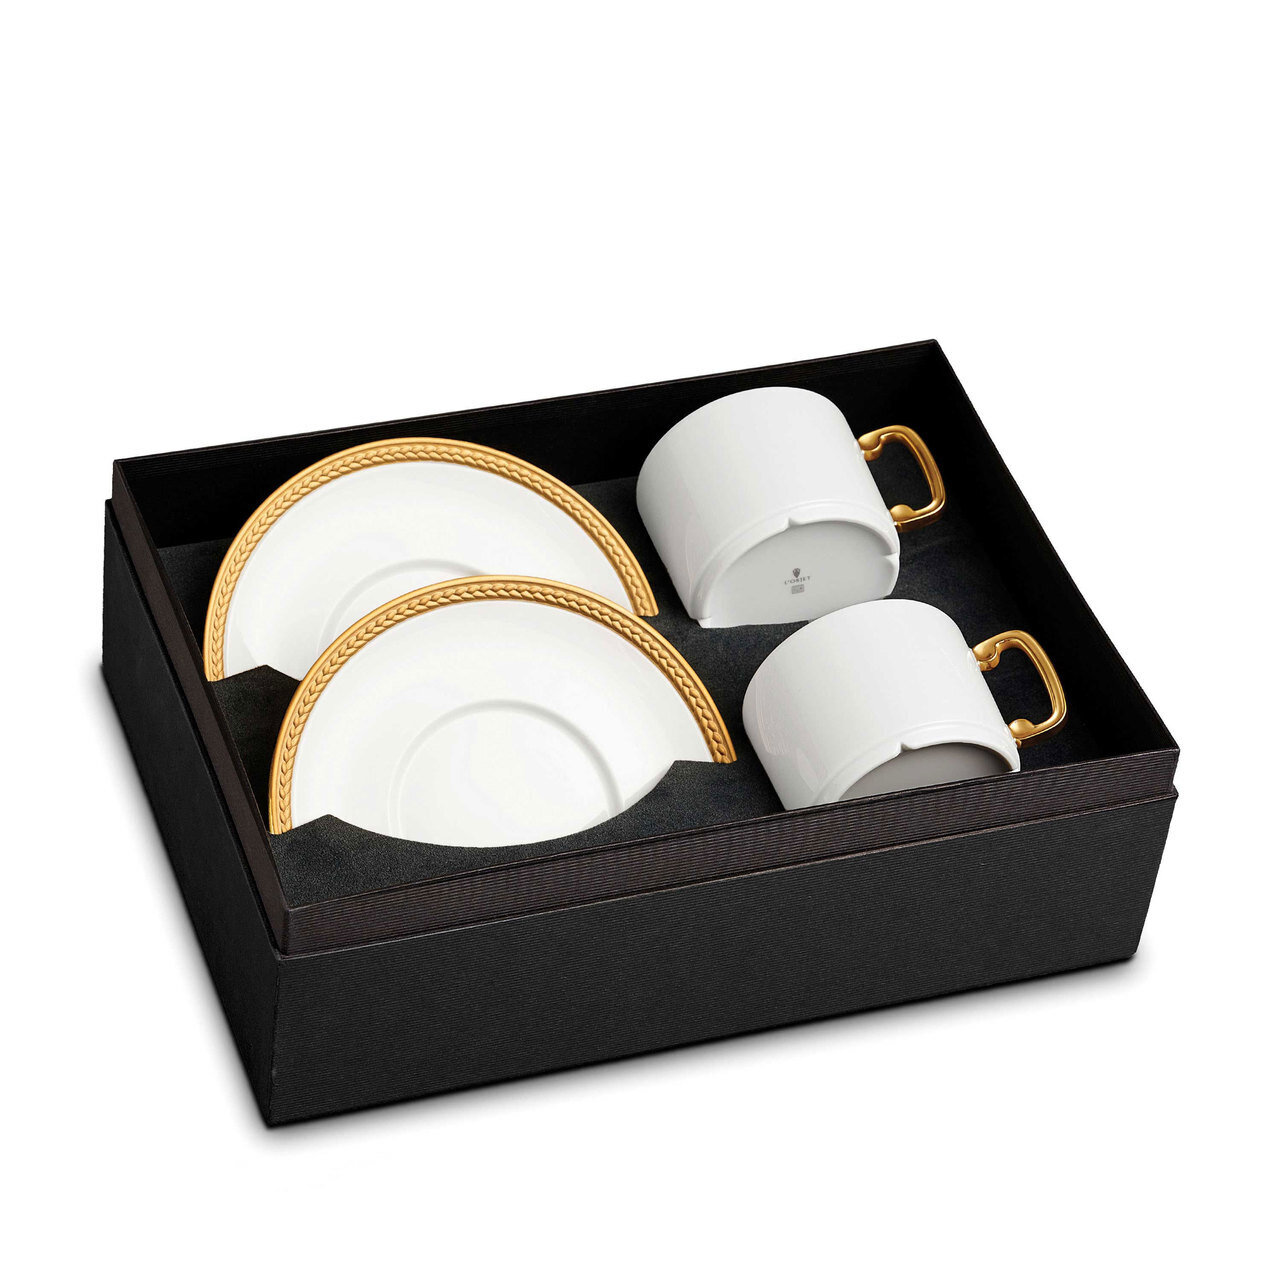 L'Objet Soie Tressee Tea Cup and Saucer Gift Box of 2 Gold